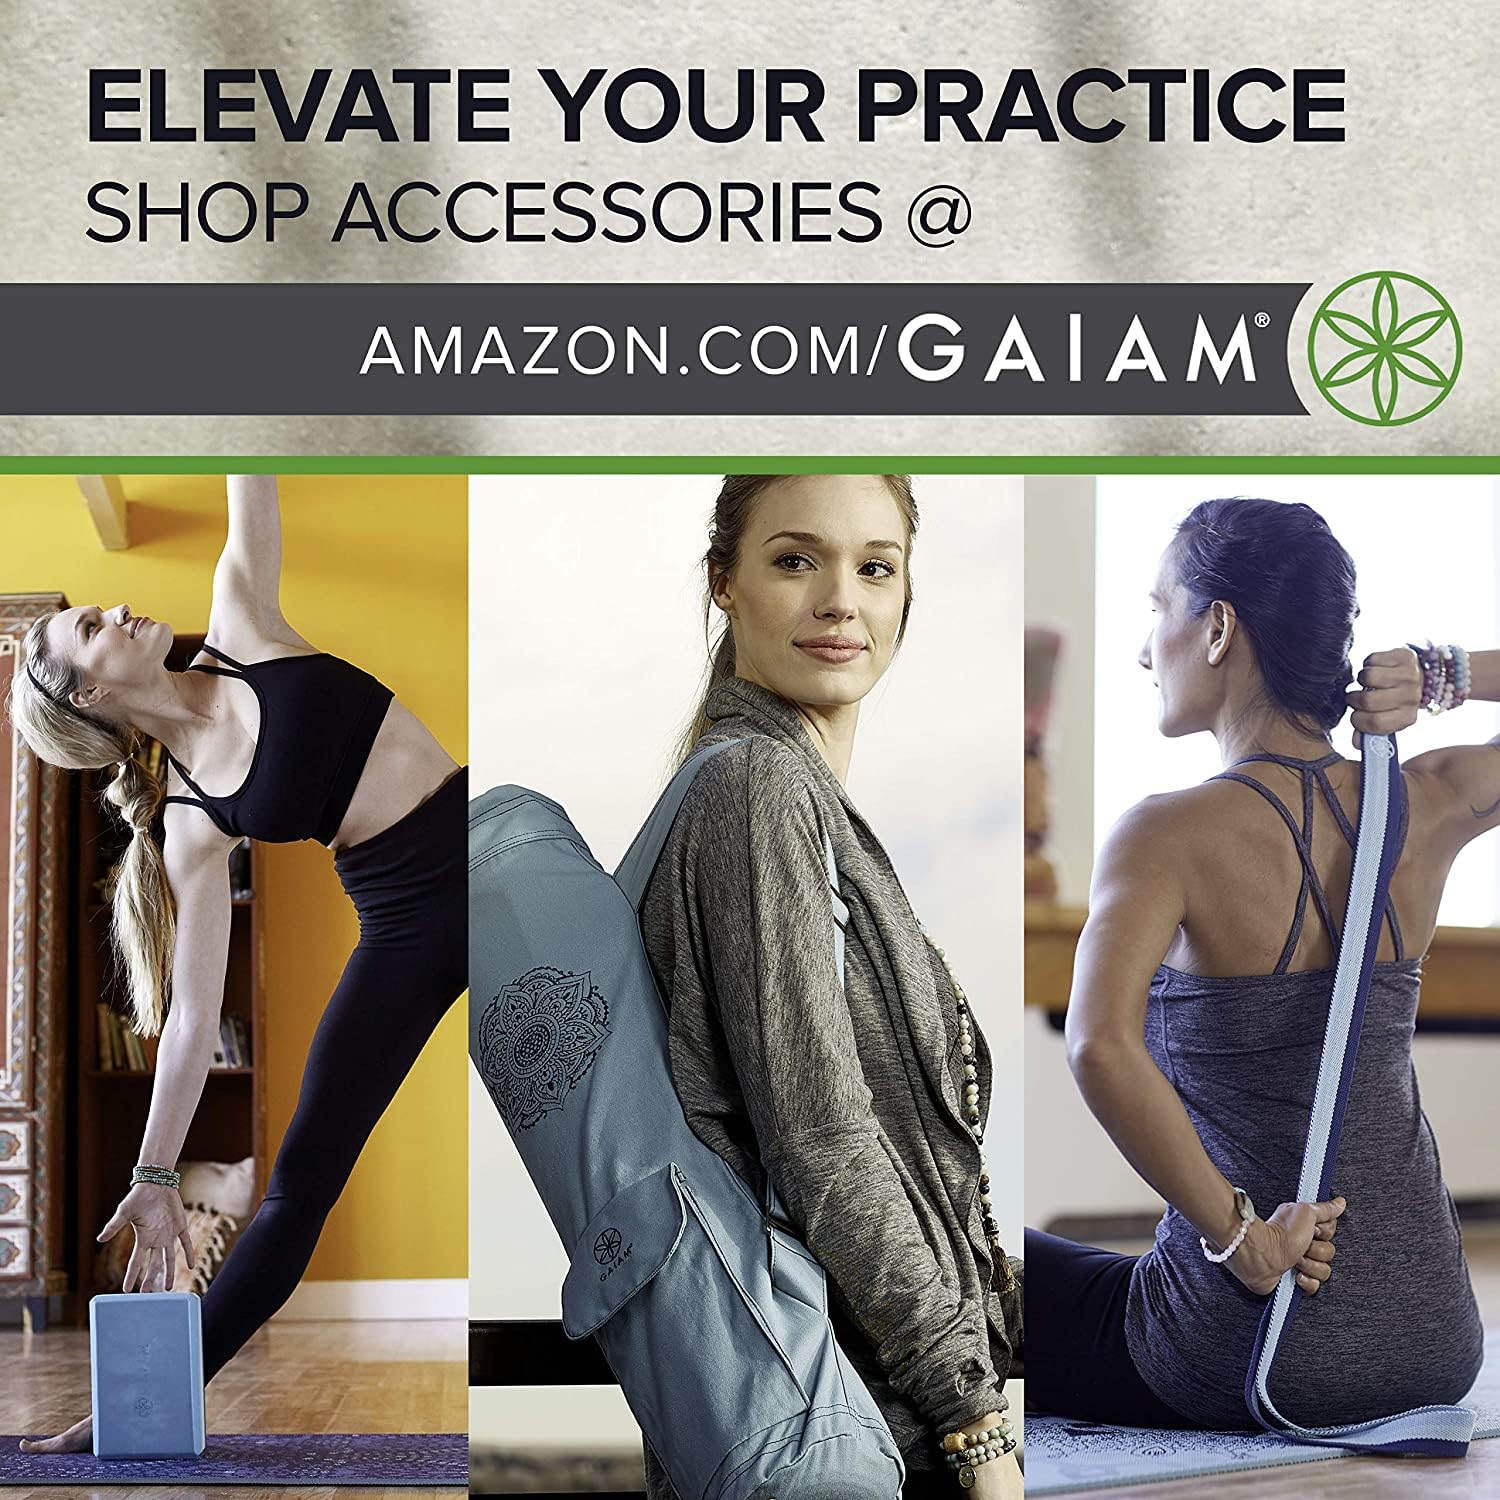 Gaiam Yoga Mat - Premium 5mm Solid Thick Non Slip Exercise & Fitness Mat for All Types of Yoga, Pilates & Floor Workouts (68